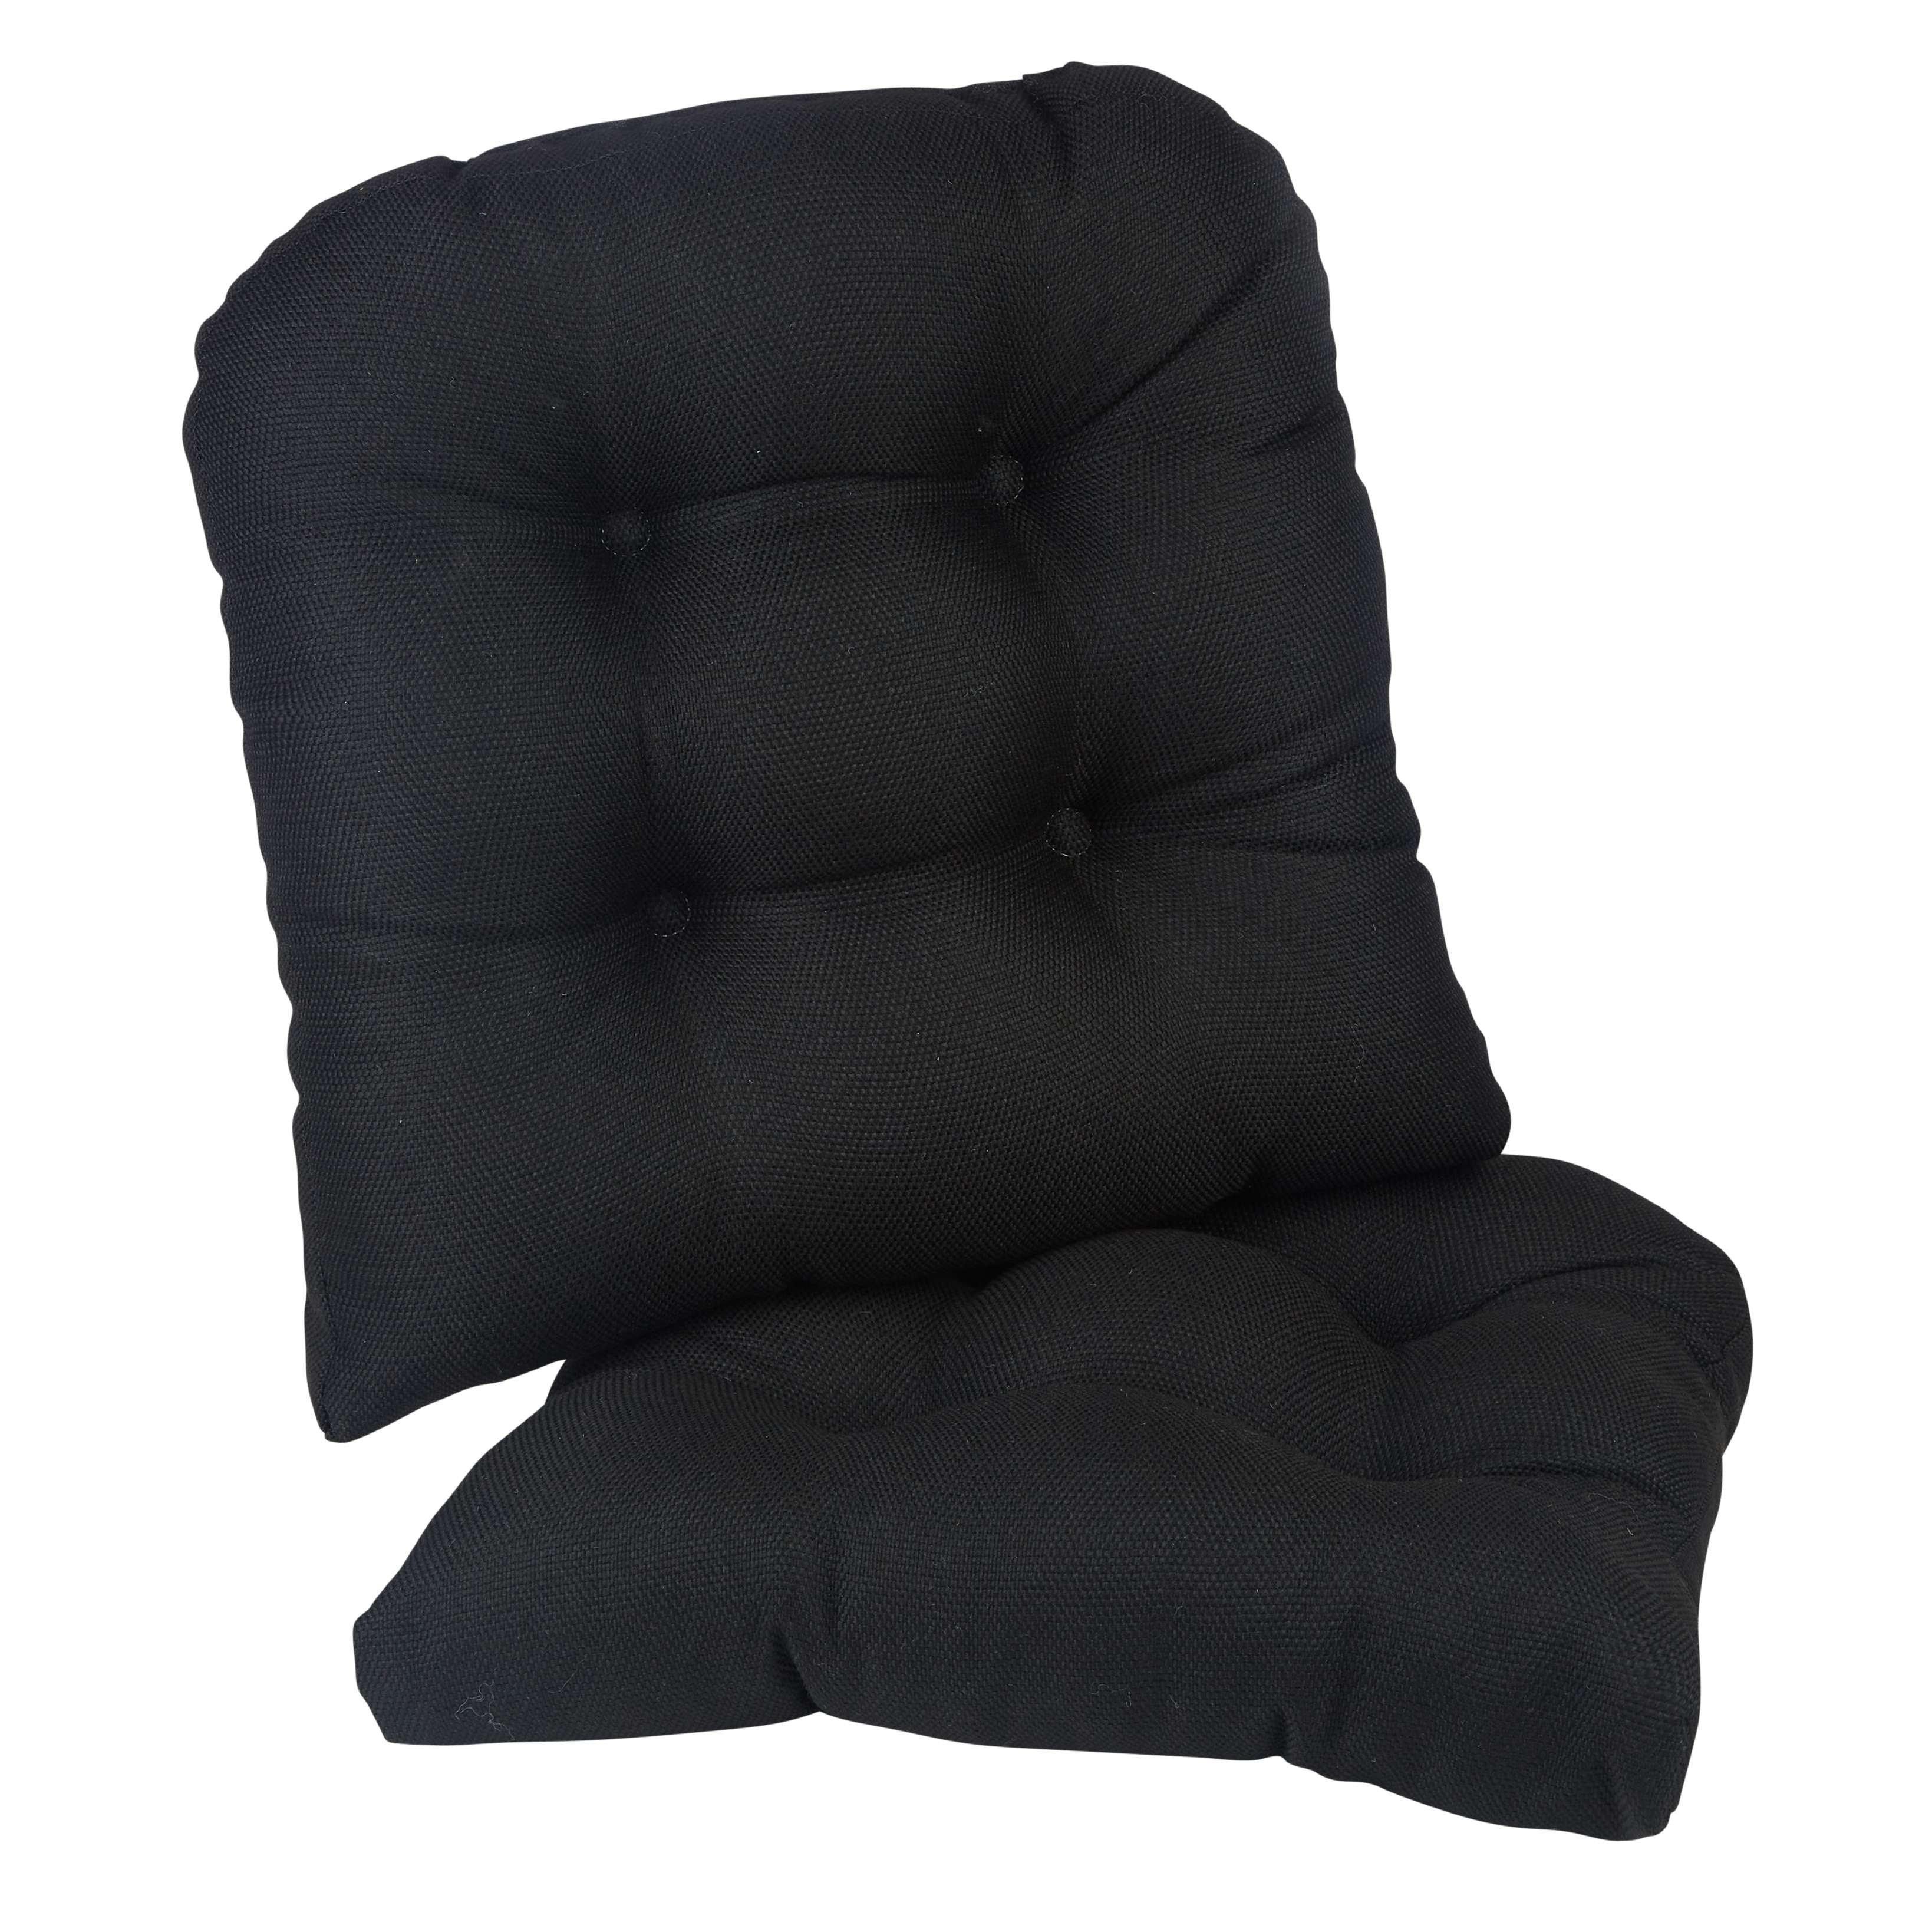 15 Best Seat Pads & Chair Cushions - Cushioning For Chairs